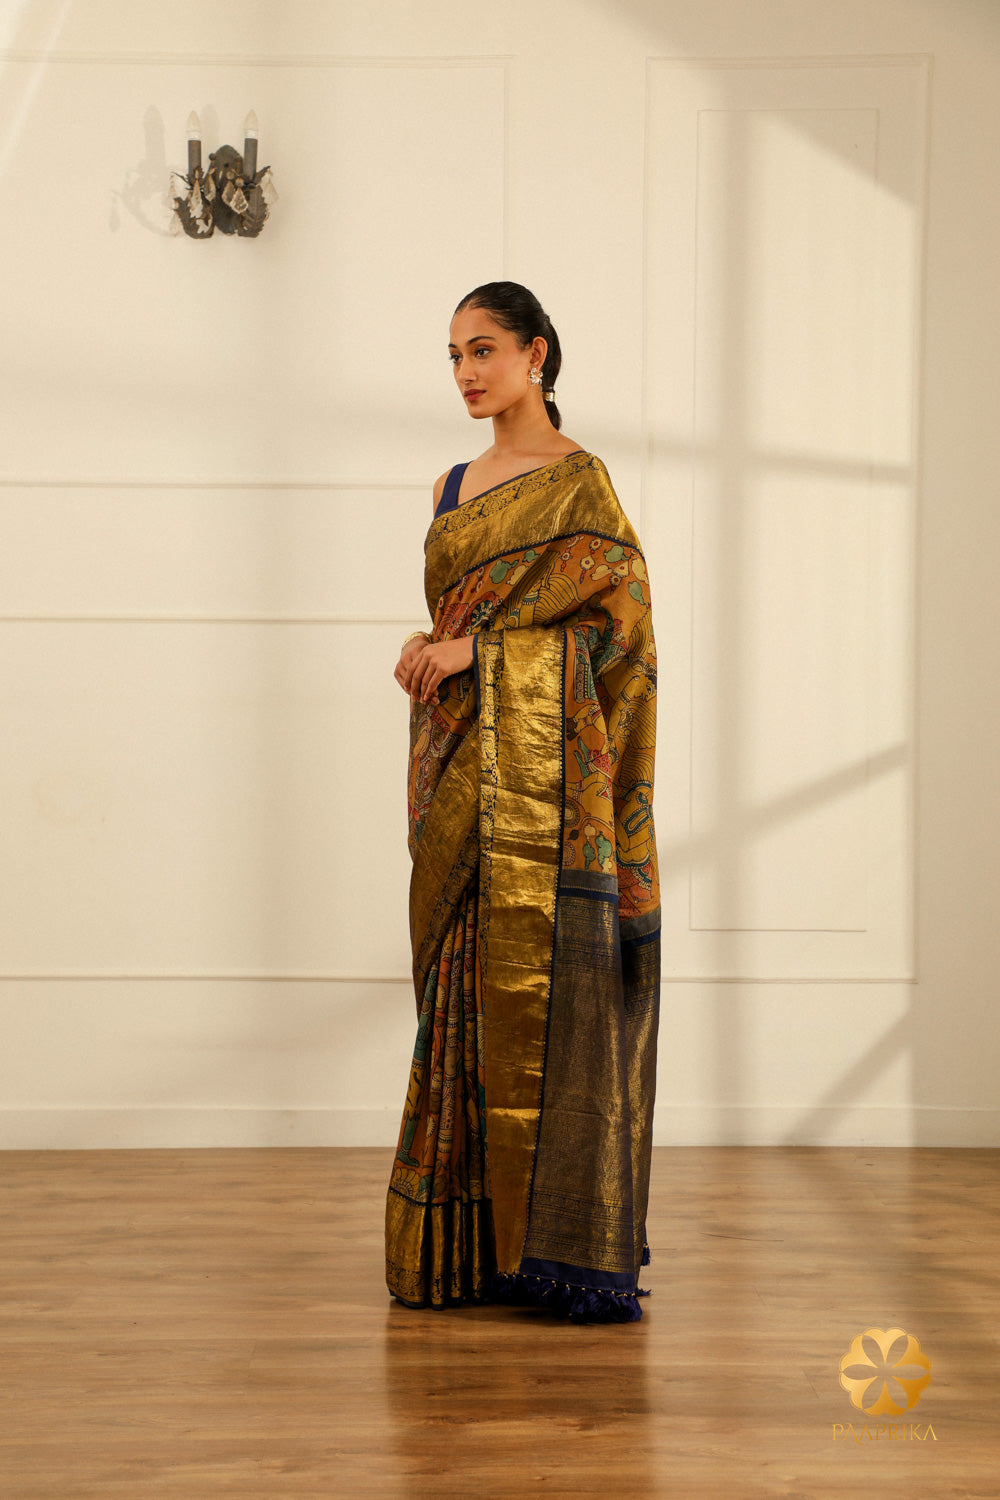 A full-length shot of a woman gracefully draped in the Kanjivaram saree, radiating cultural richness and spiritual significance.